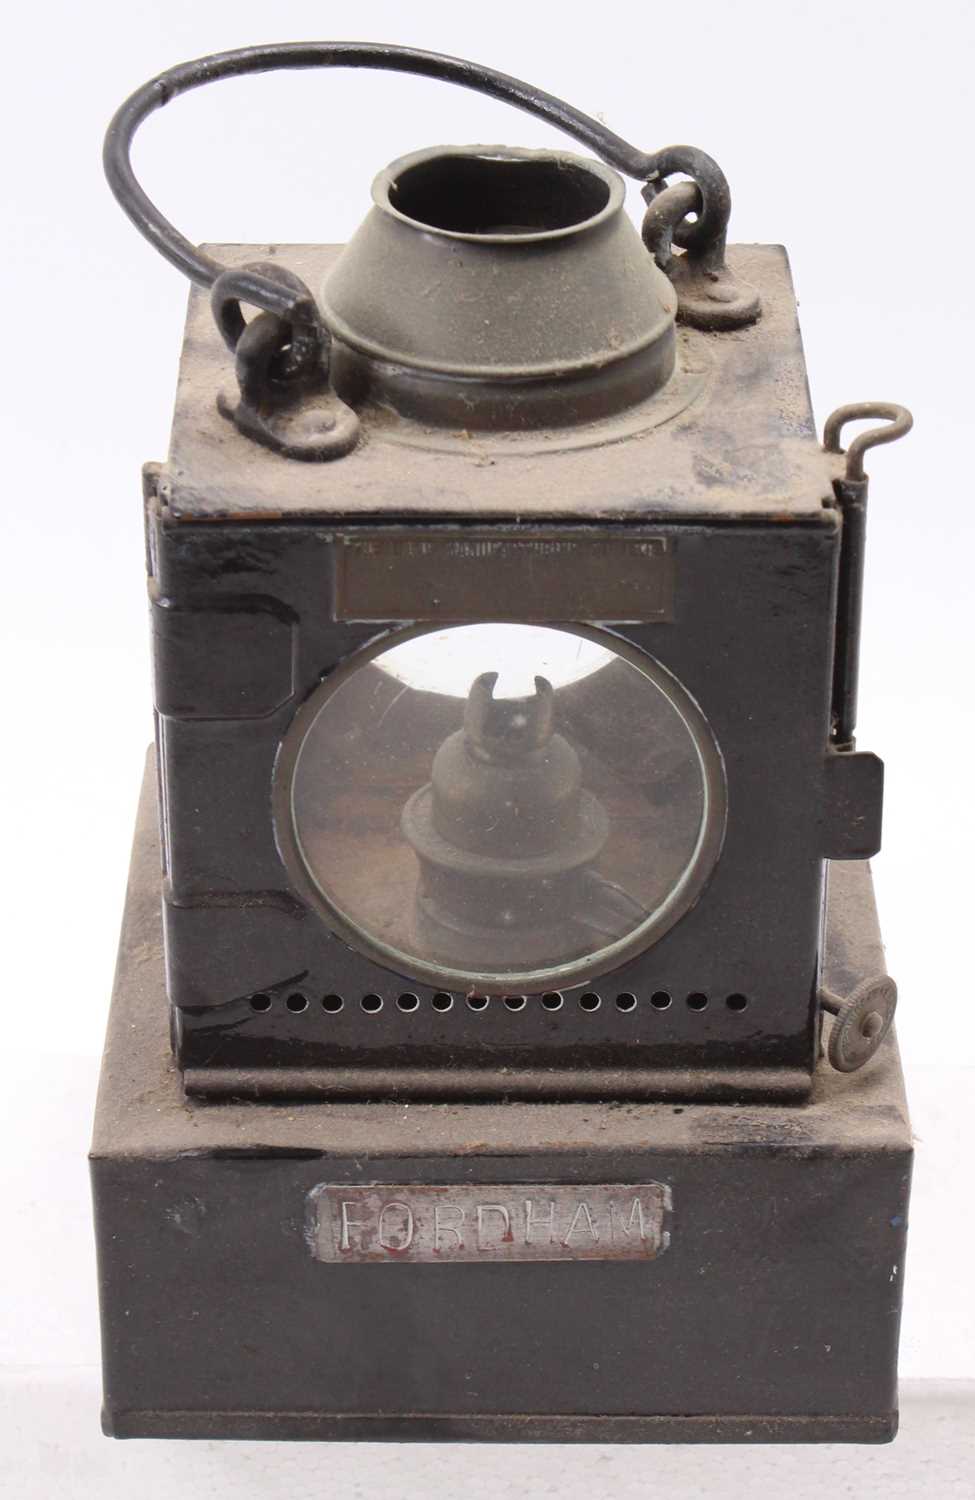 A Welch patent four aspect Eastern Region railway hand lamp with manufacturer's plaque and station